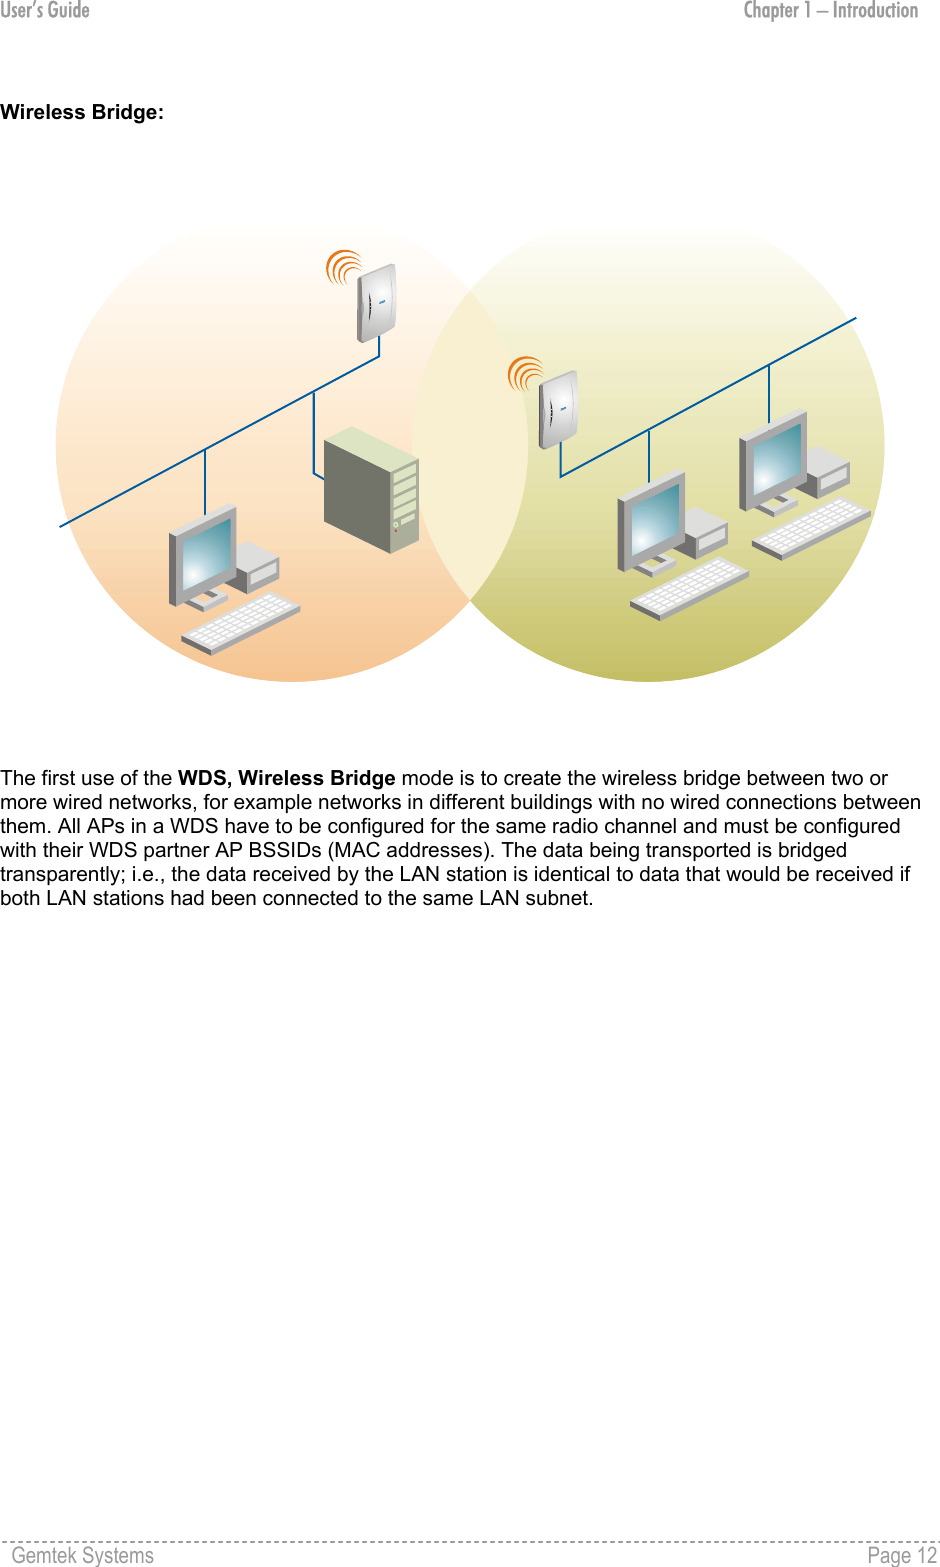 User’s Guide  Chapter 1 – Introduction  Wireless Bridge:  The first use of the WDS, Wireless Bridge mode is to create the wireless bridge between two or more wired networks, for example networks in different buildings with no wired connections between them. All APs in a WDS have to be configured for the same radio channel and must be configured with their WDS partner AP BSSIDs (MAC addresses). The data being transported is bridged transparently; i.e., the data received by the LAN station is identical to data that would be received if both LAN stations had been connected to the same LAN subnet.                 Gemtek Systems    Page 12  